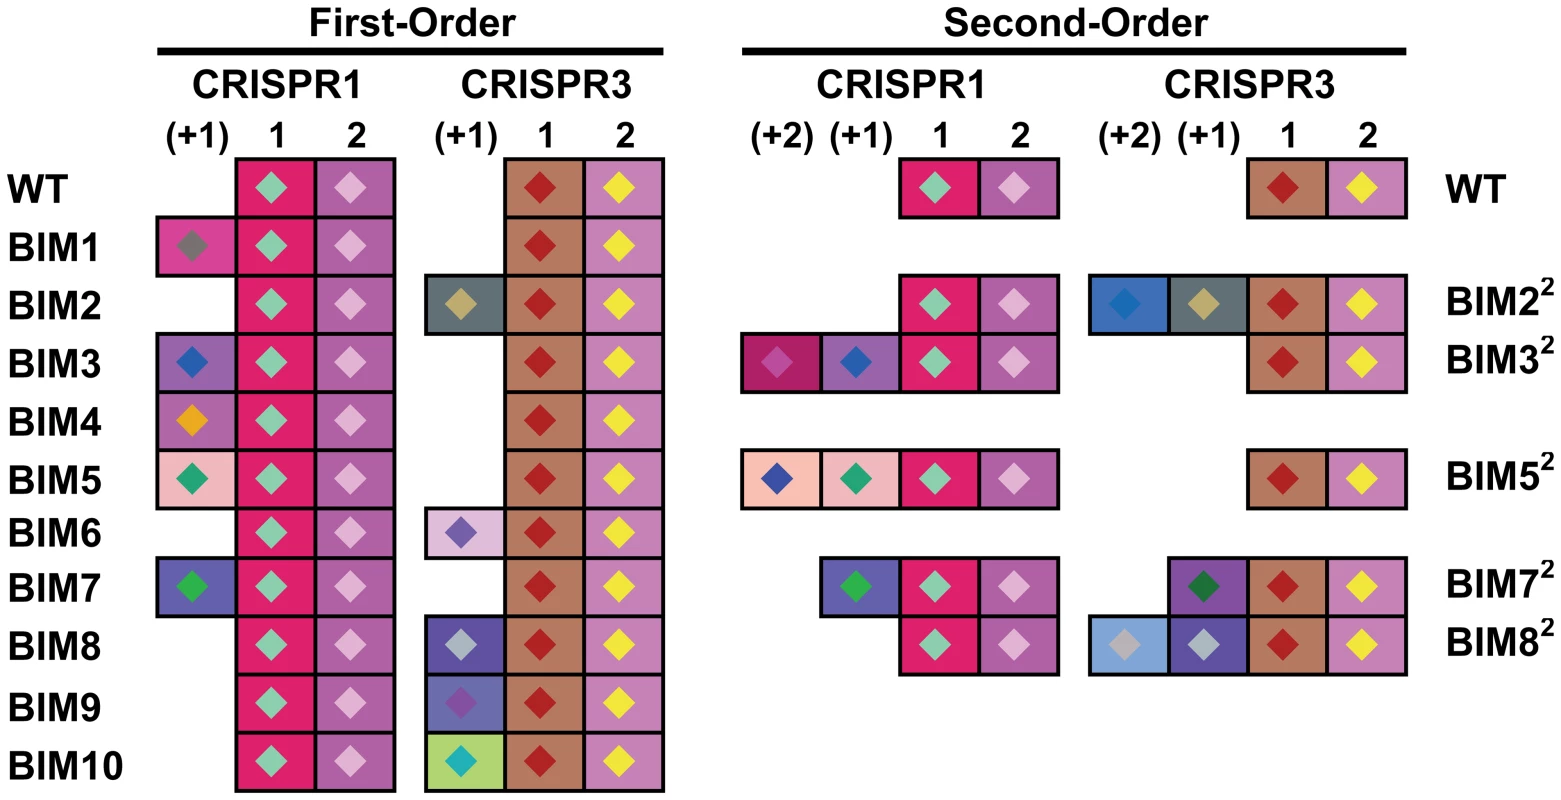 Graphical representation of spacers across the two CRISPR loci for <i>S. thermophilus</i> BIMs.